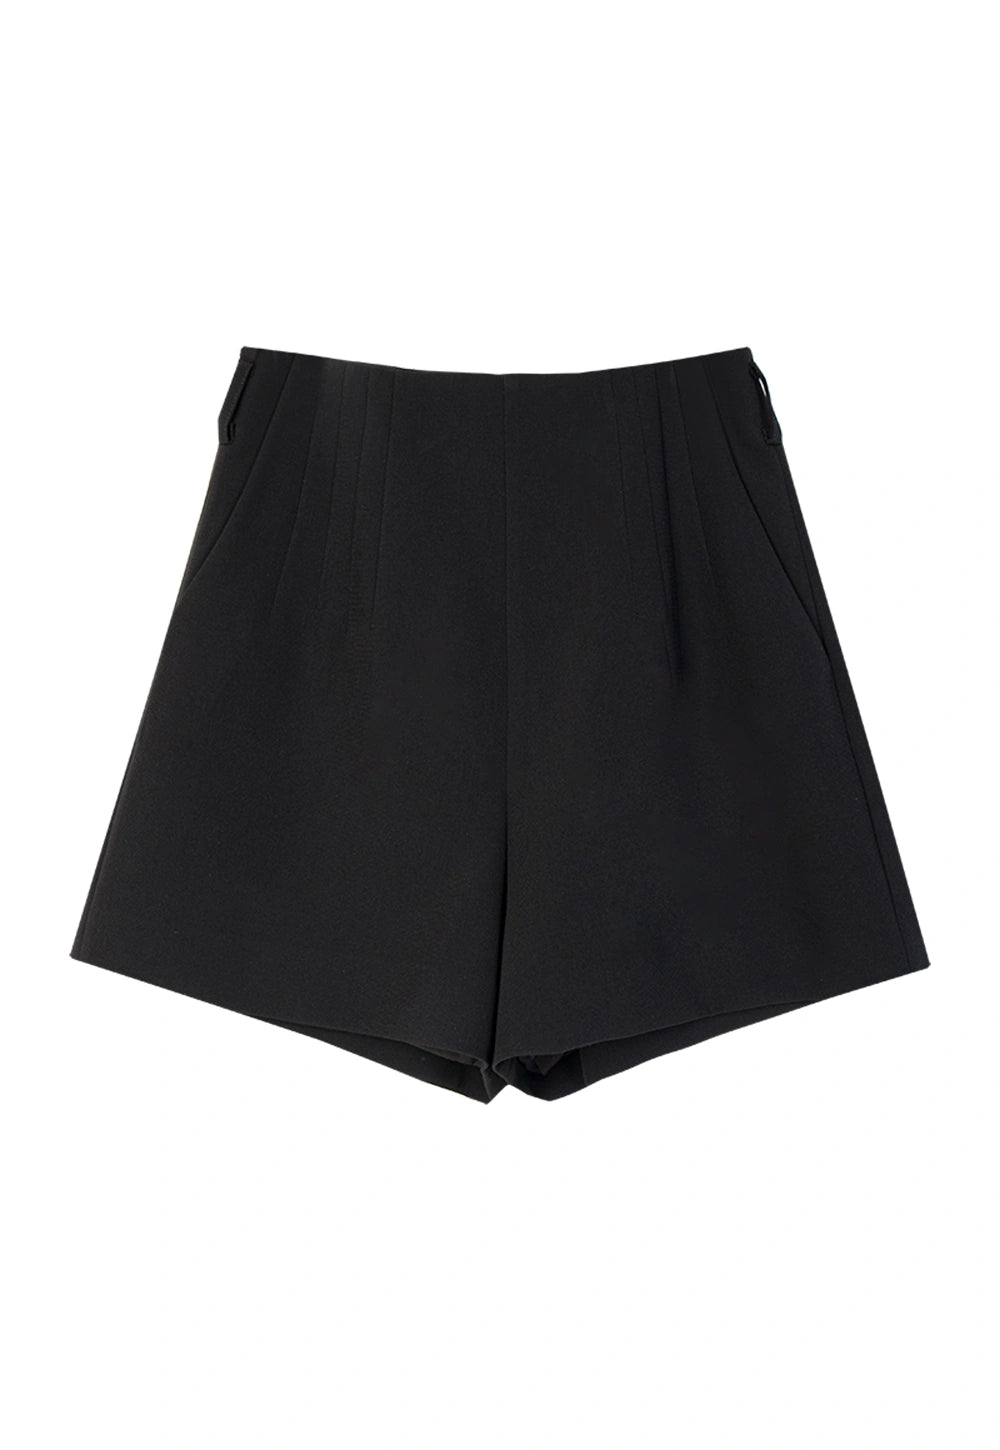 Women's Blue Pleated Shorts - High Waist, Tailored Fit, Perfect for Summer Casual or Dressy Occasions